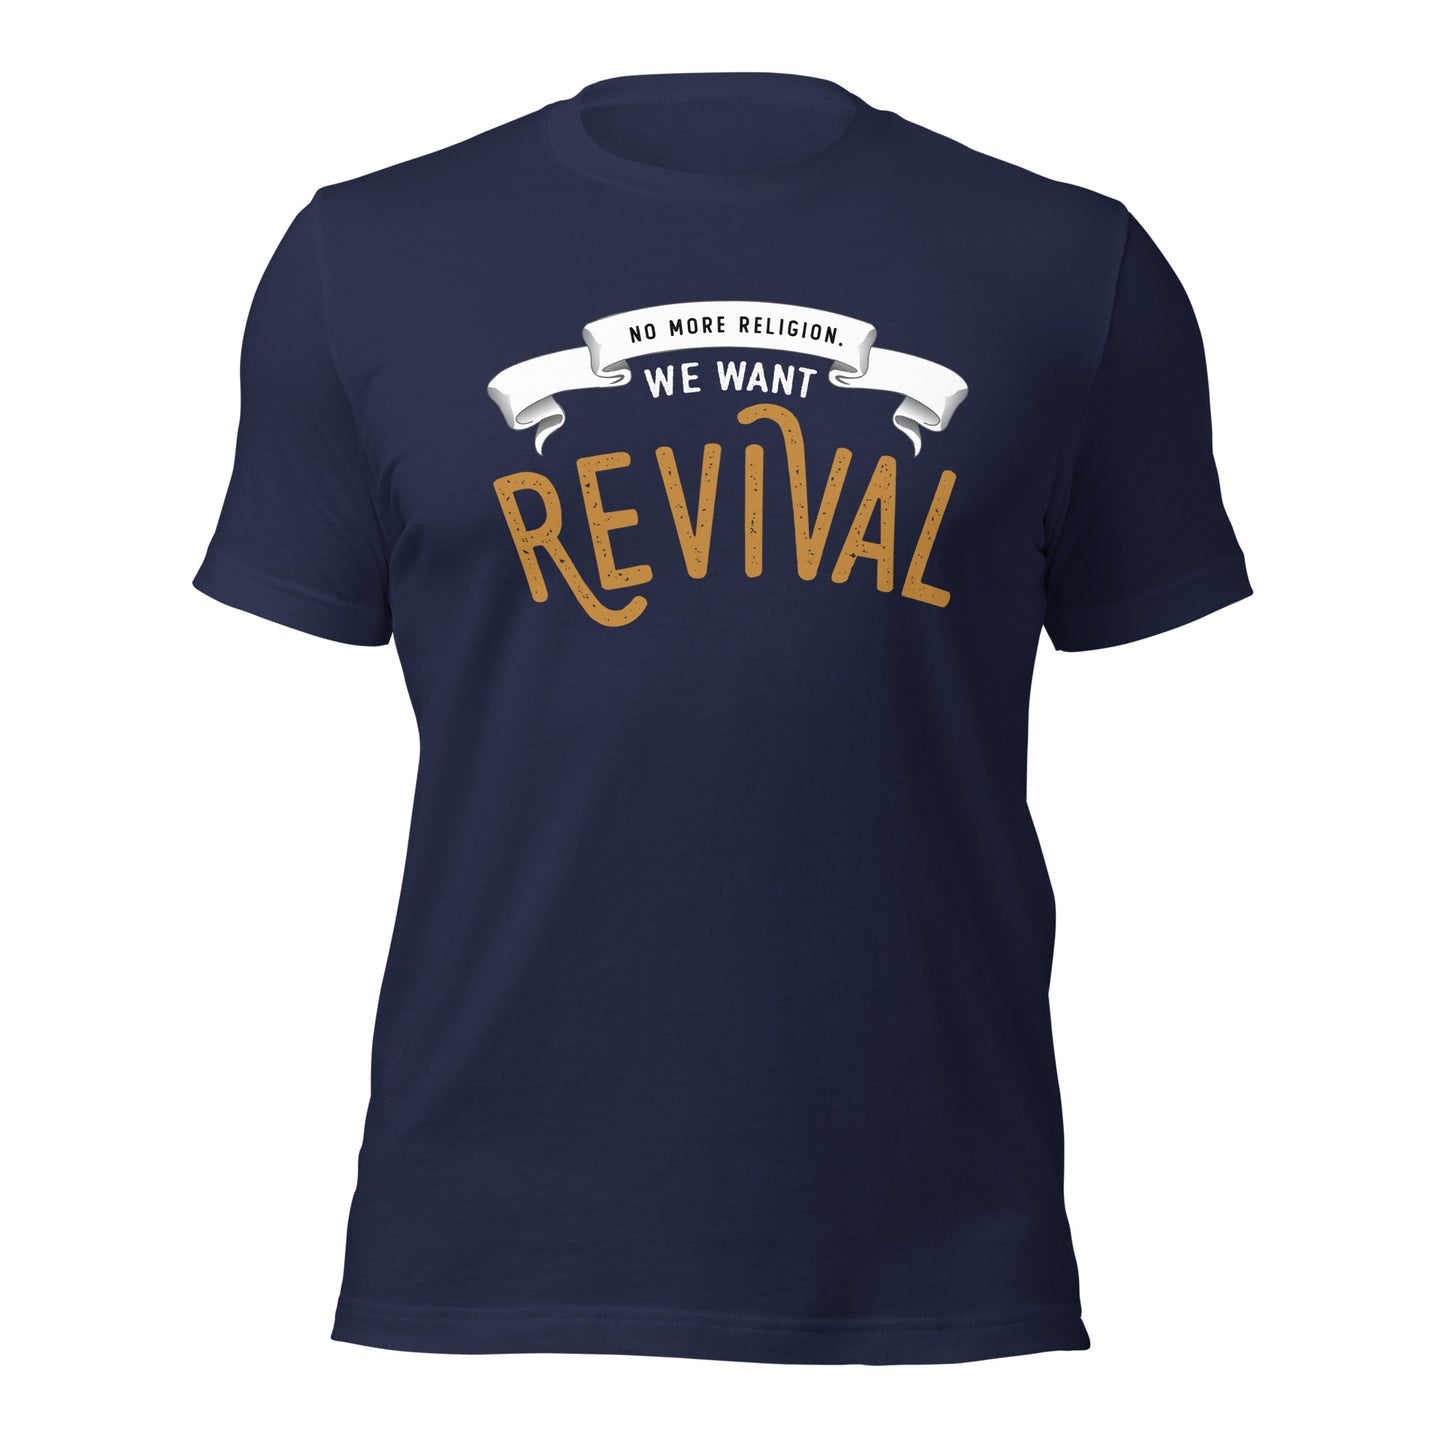 Navy Blue Christian aesthetic soft Unisex T-shirt that says, No More Religion We Want Revival printed in gold and white, church gift Jesus graphic tees designed for men and women 